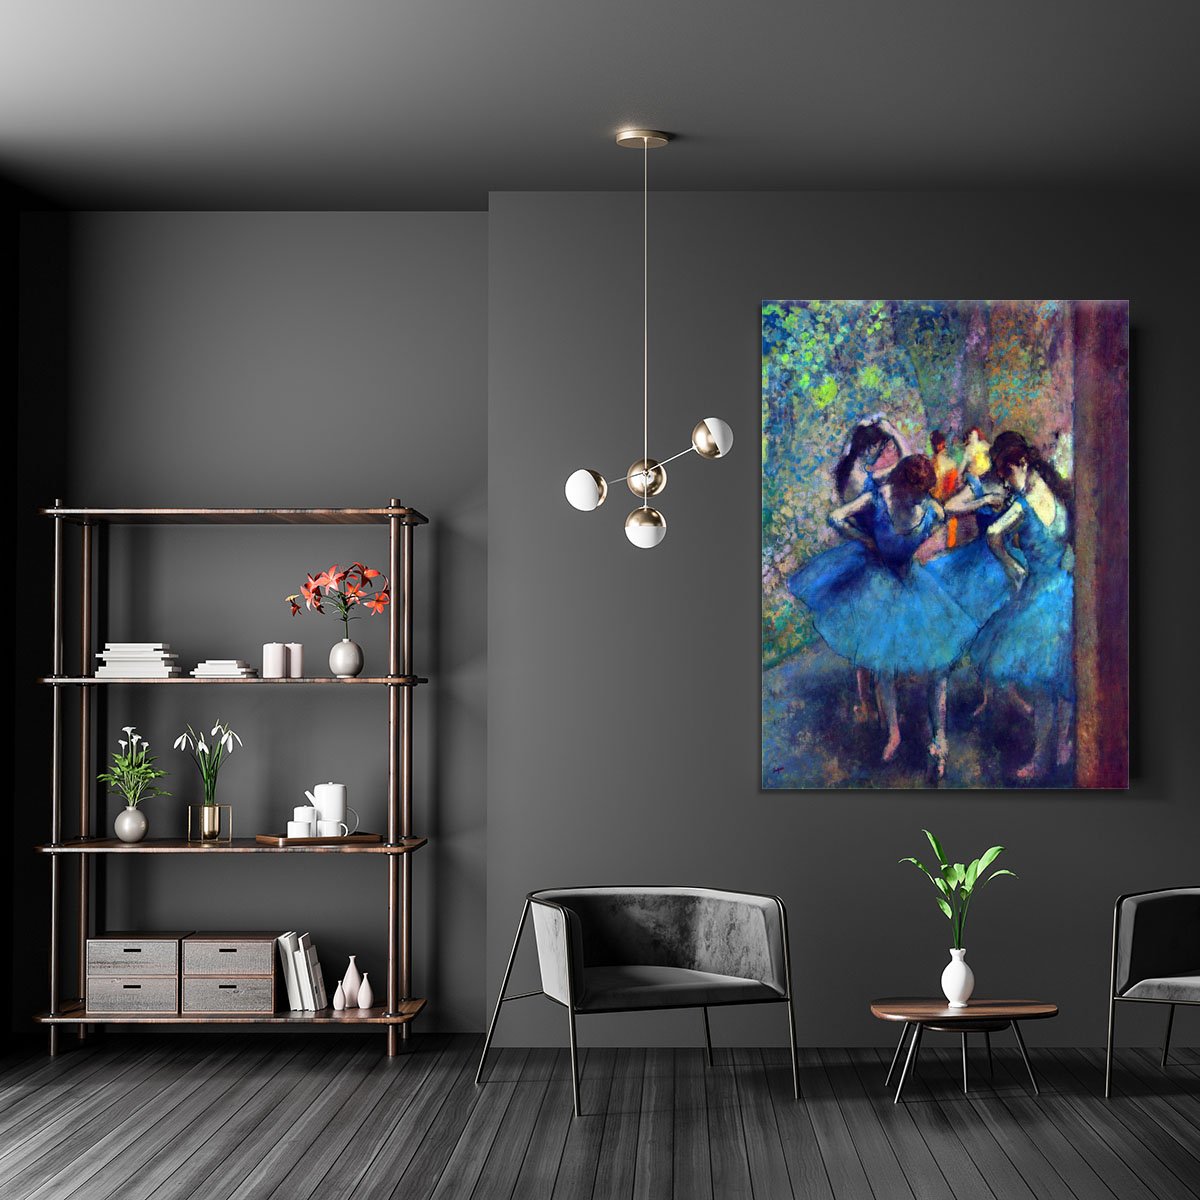 Dancers 1 by Degas Canvas Print or Poster